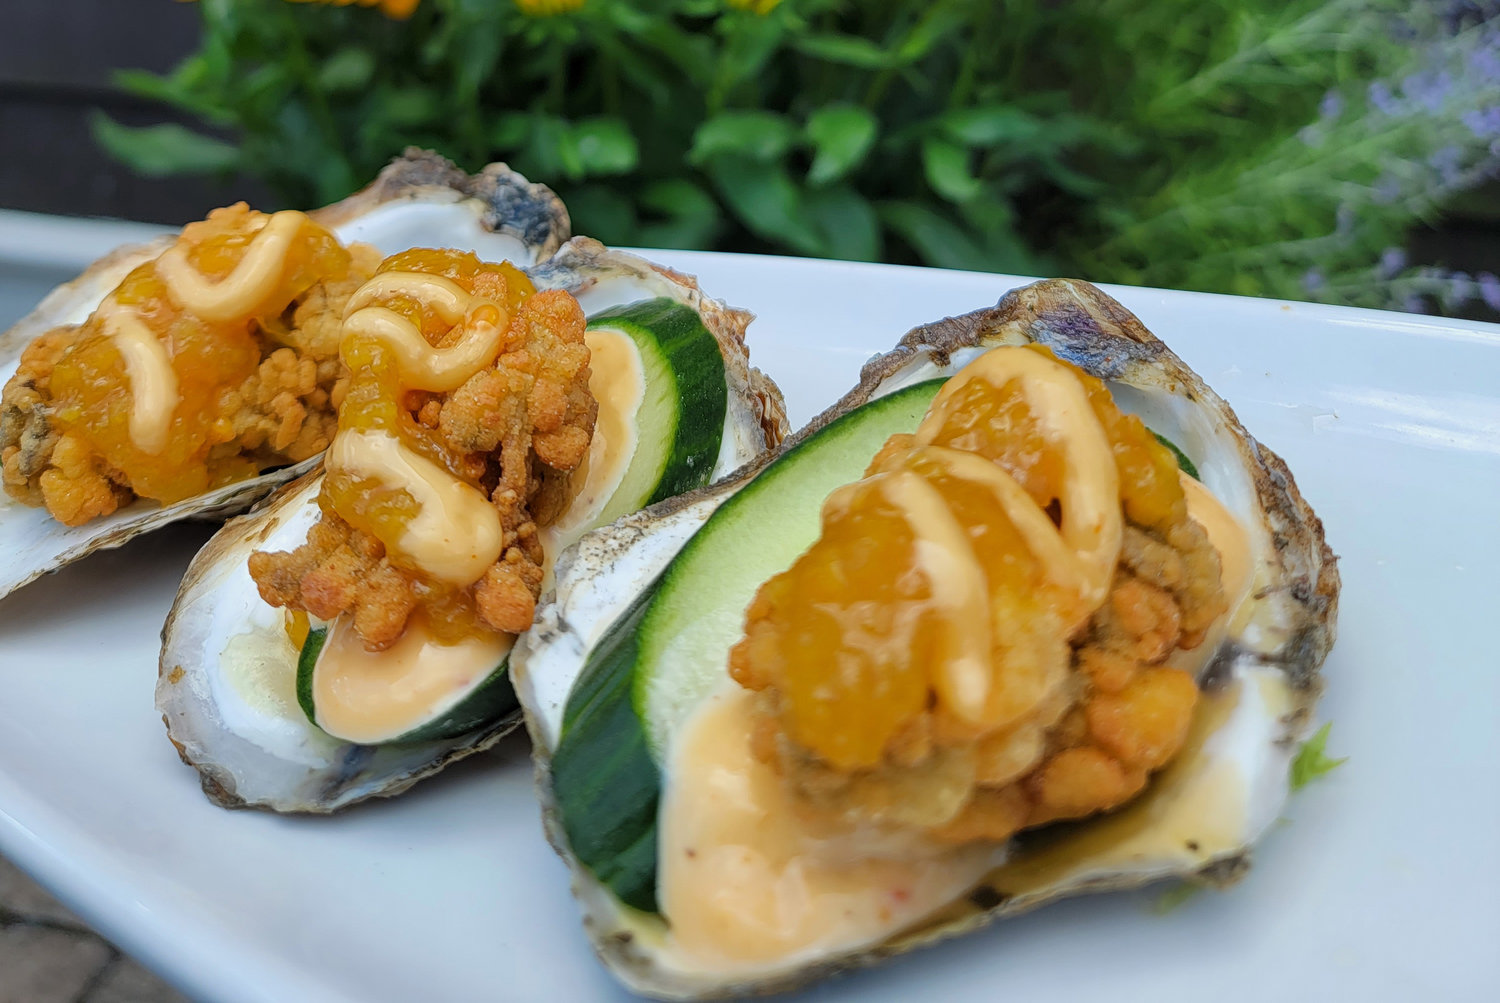 Fried oysters with orange marmalade and honey chili aioli